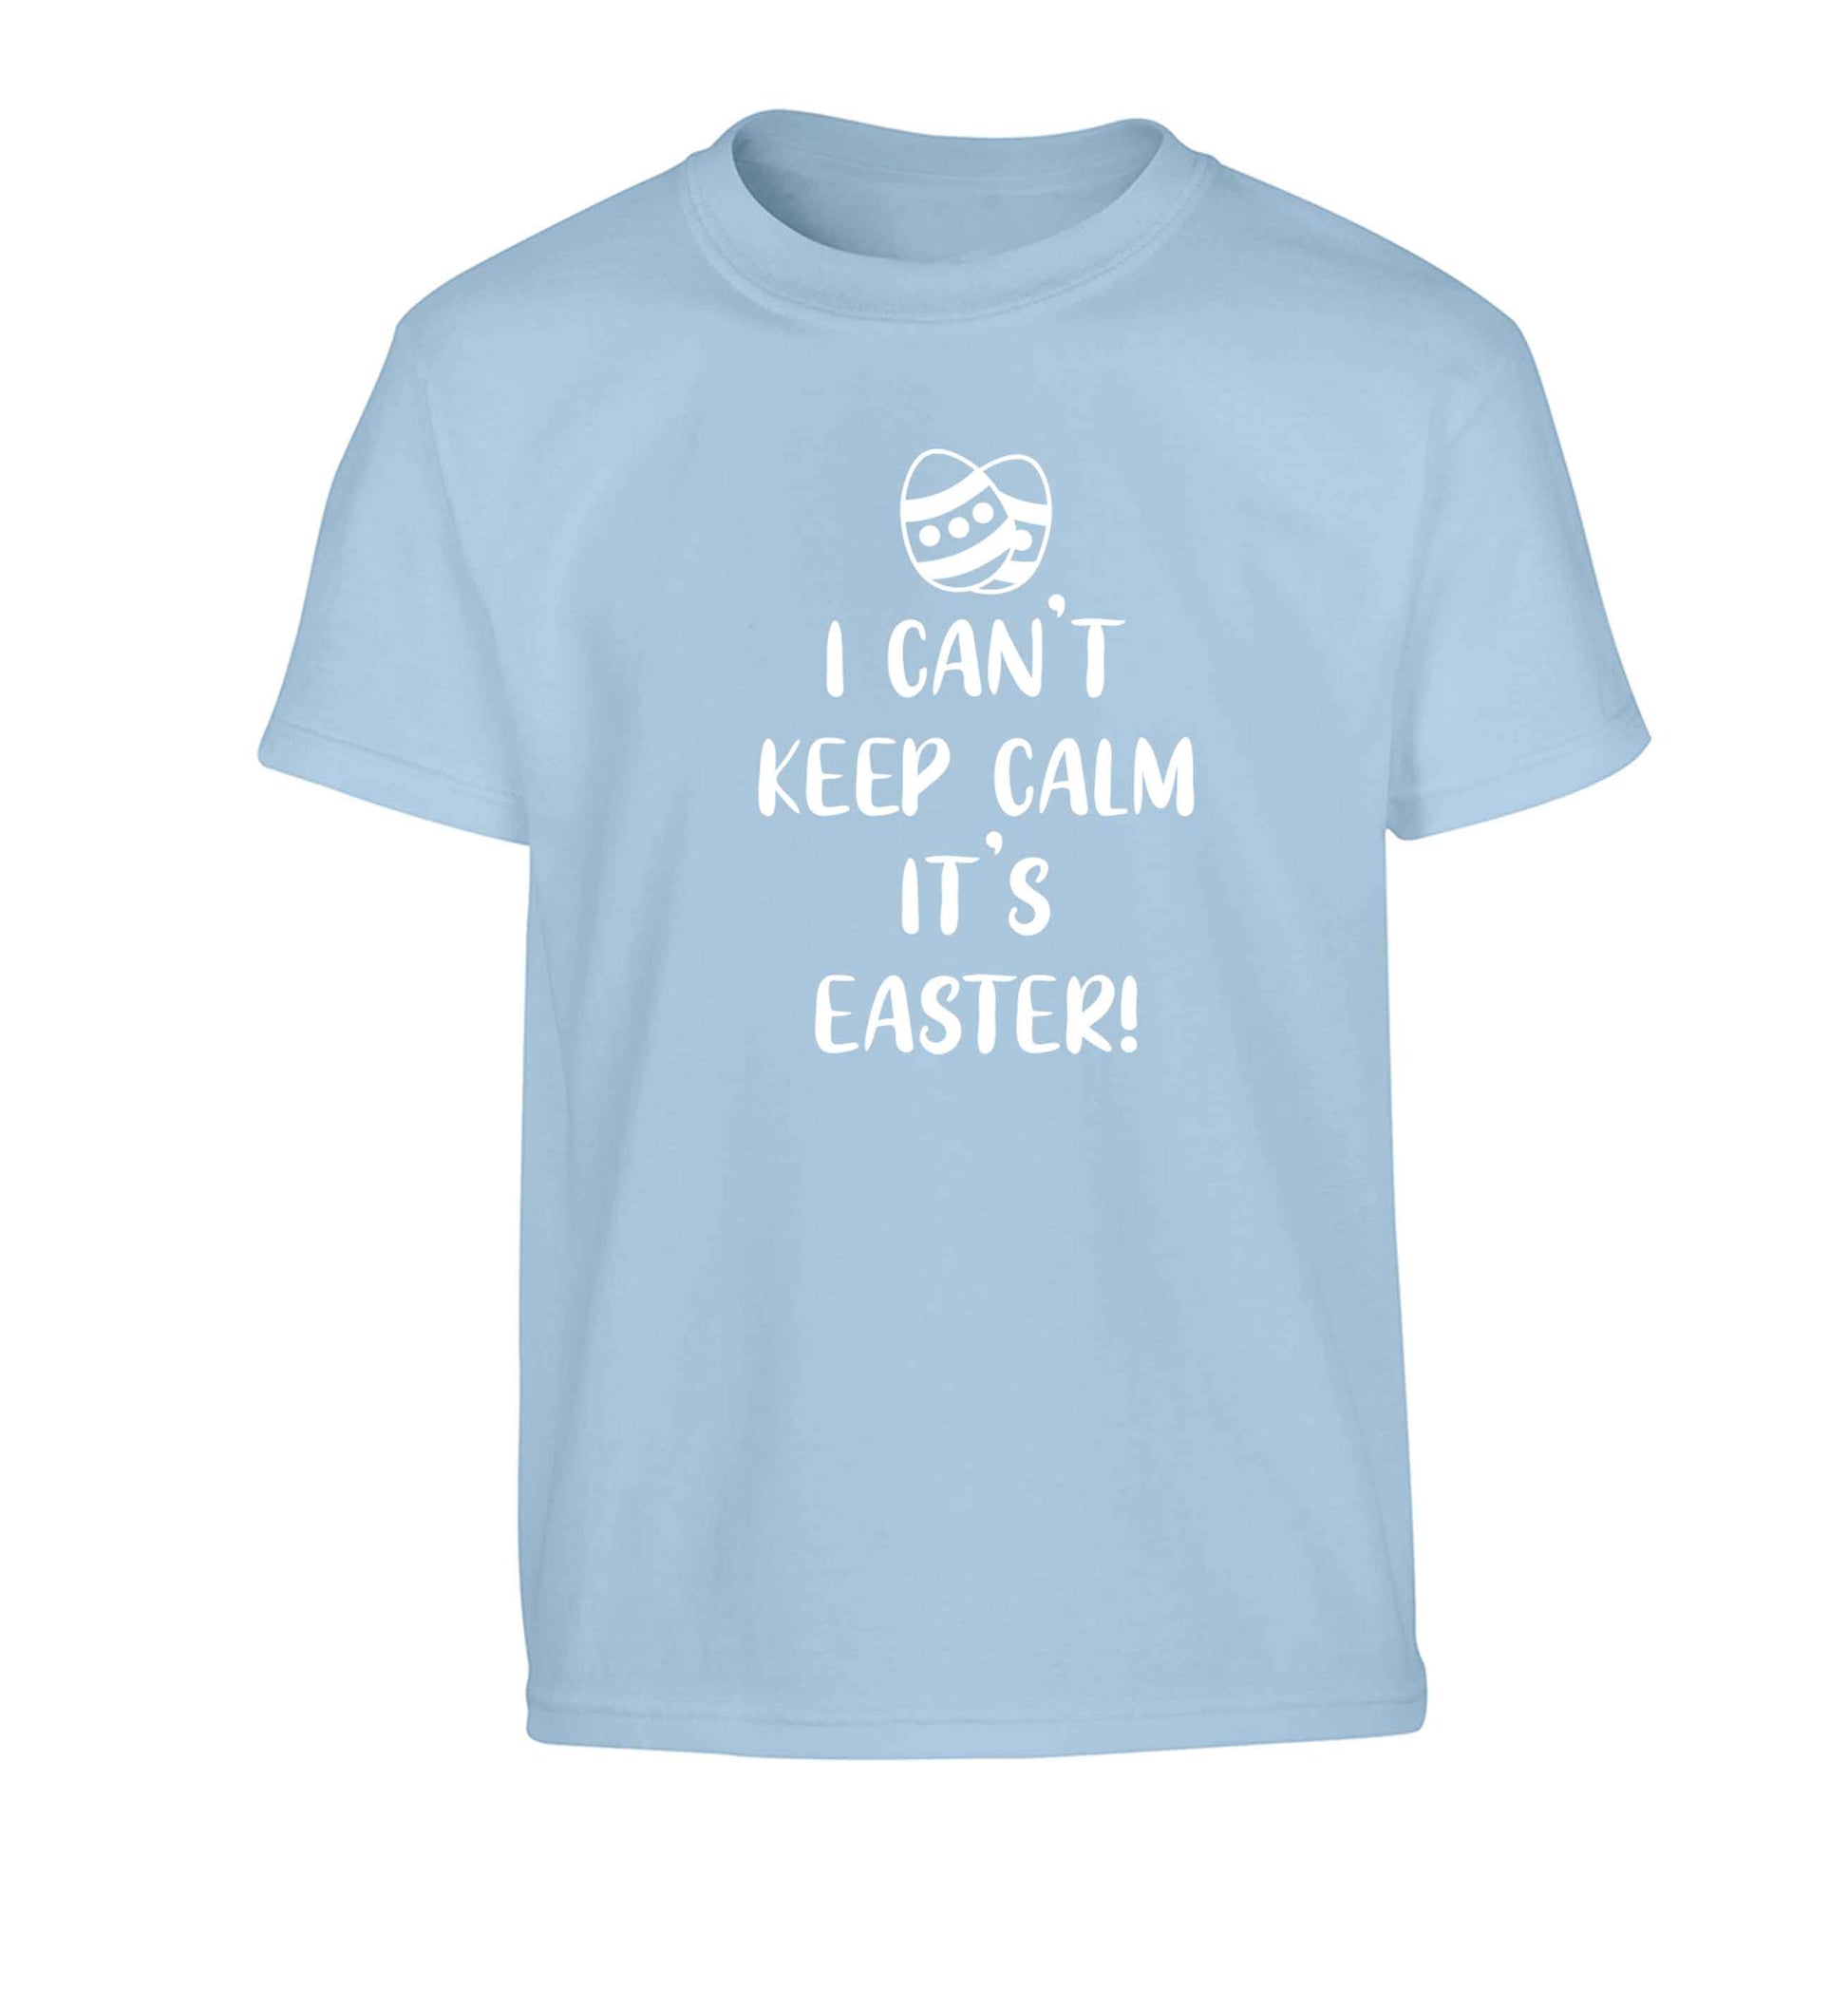 I can't keep calm it's Easter Children's light blue Tshirt 12-13 Years